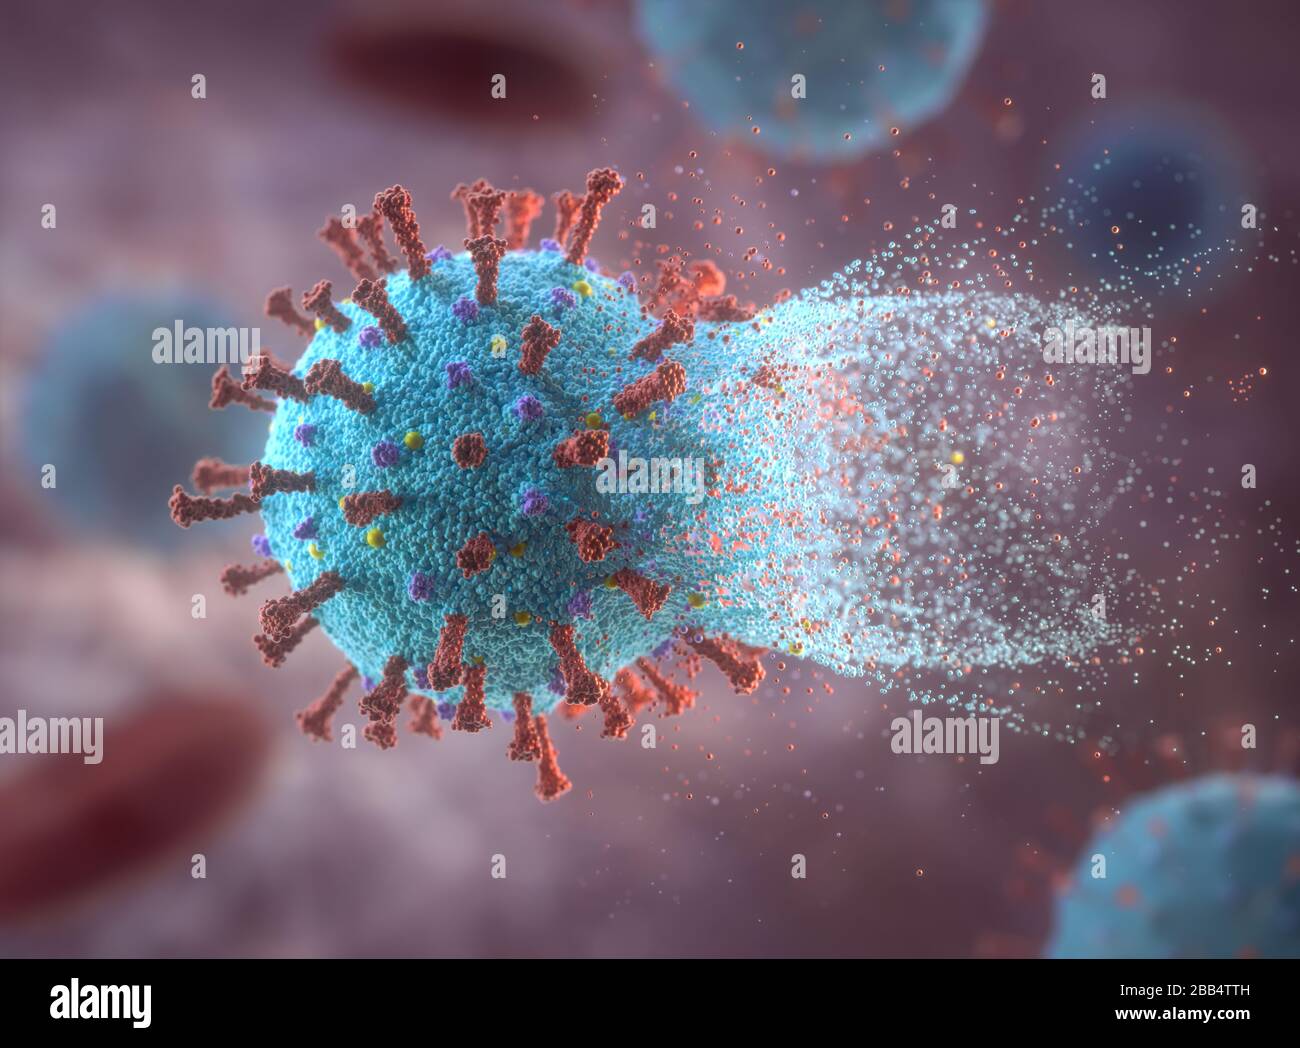 Concept image of the destruction of a virus. Vaccine and idea of prophylaxis, preventive healthcare. 3D illustration. Stock Photo